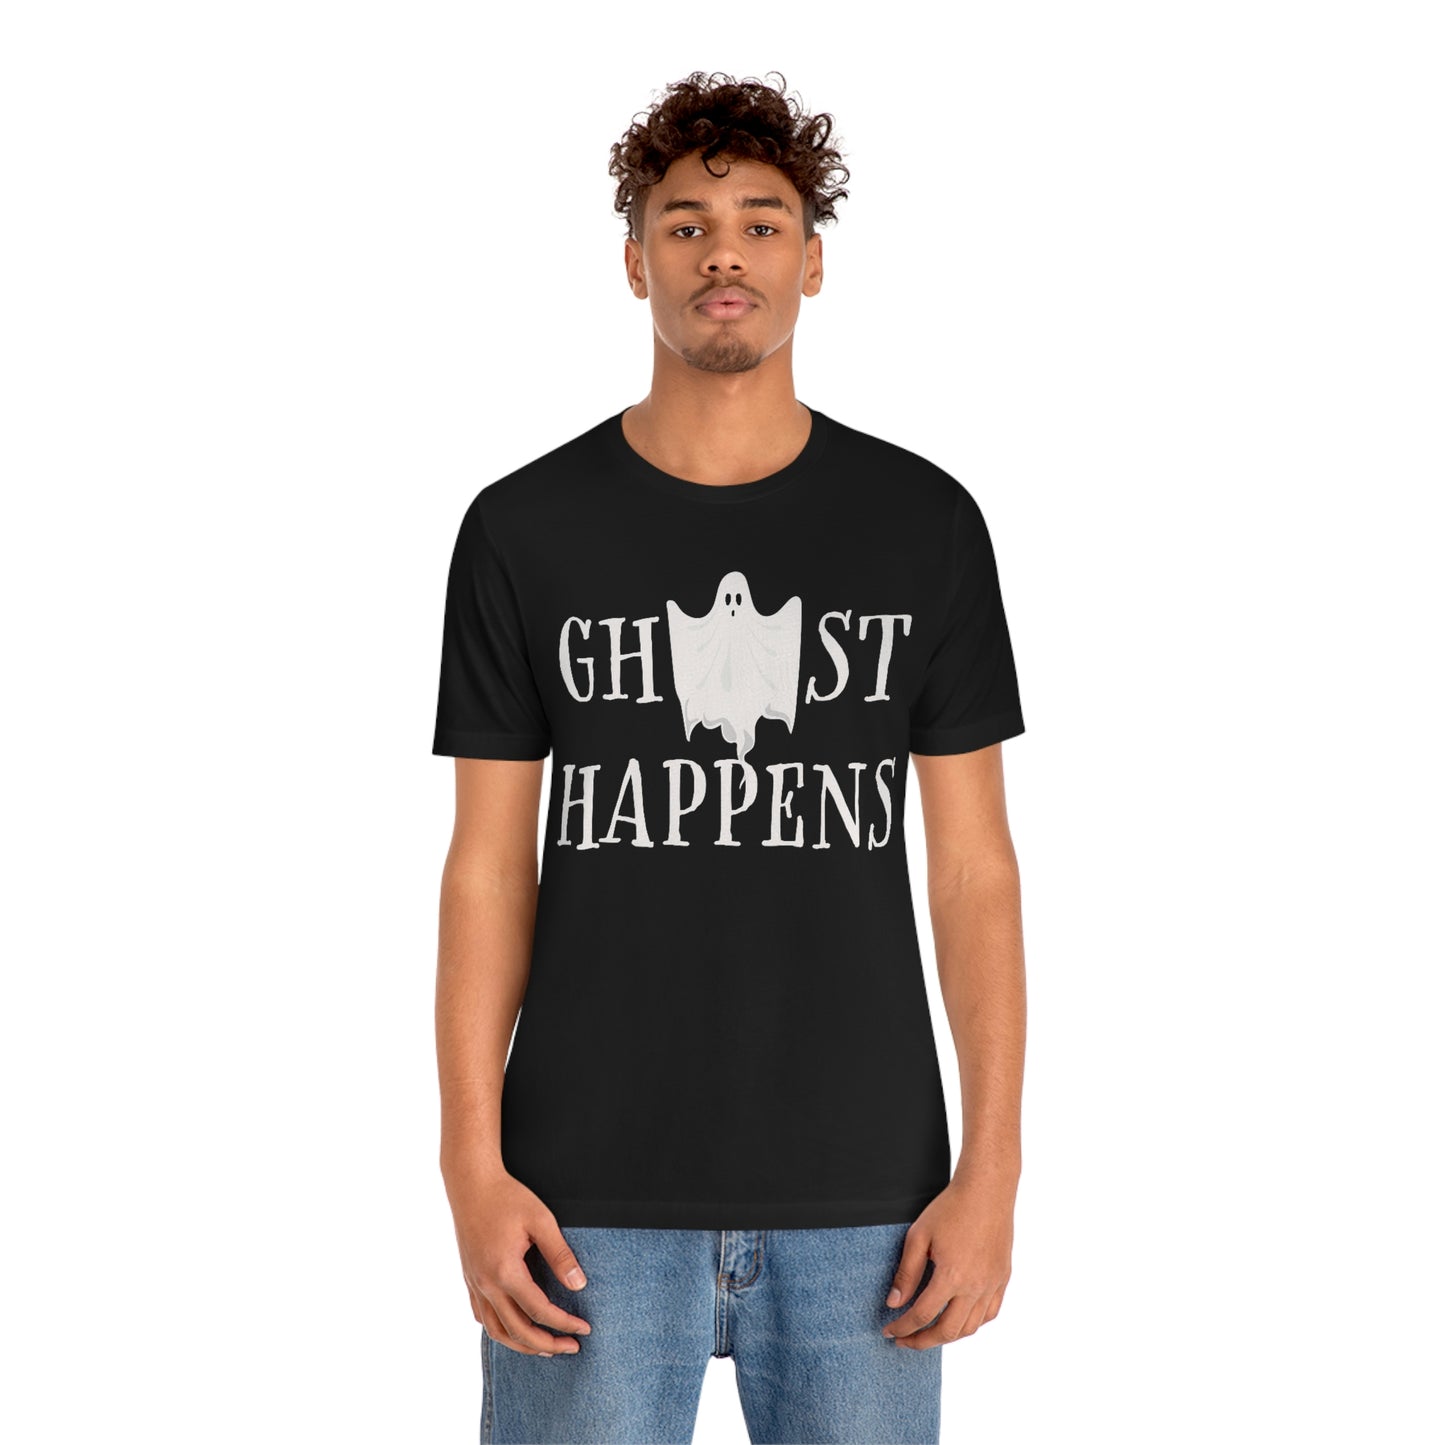 Scared & Alone - Ghosts Happens Unisex Jersey Short Sleeve Tee